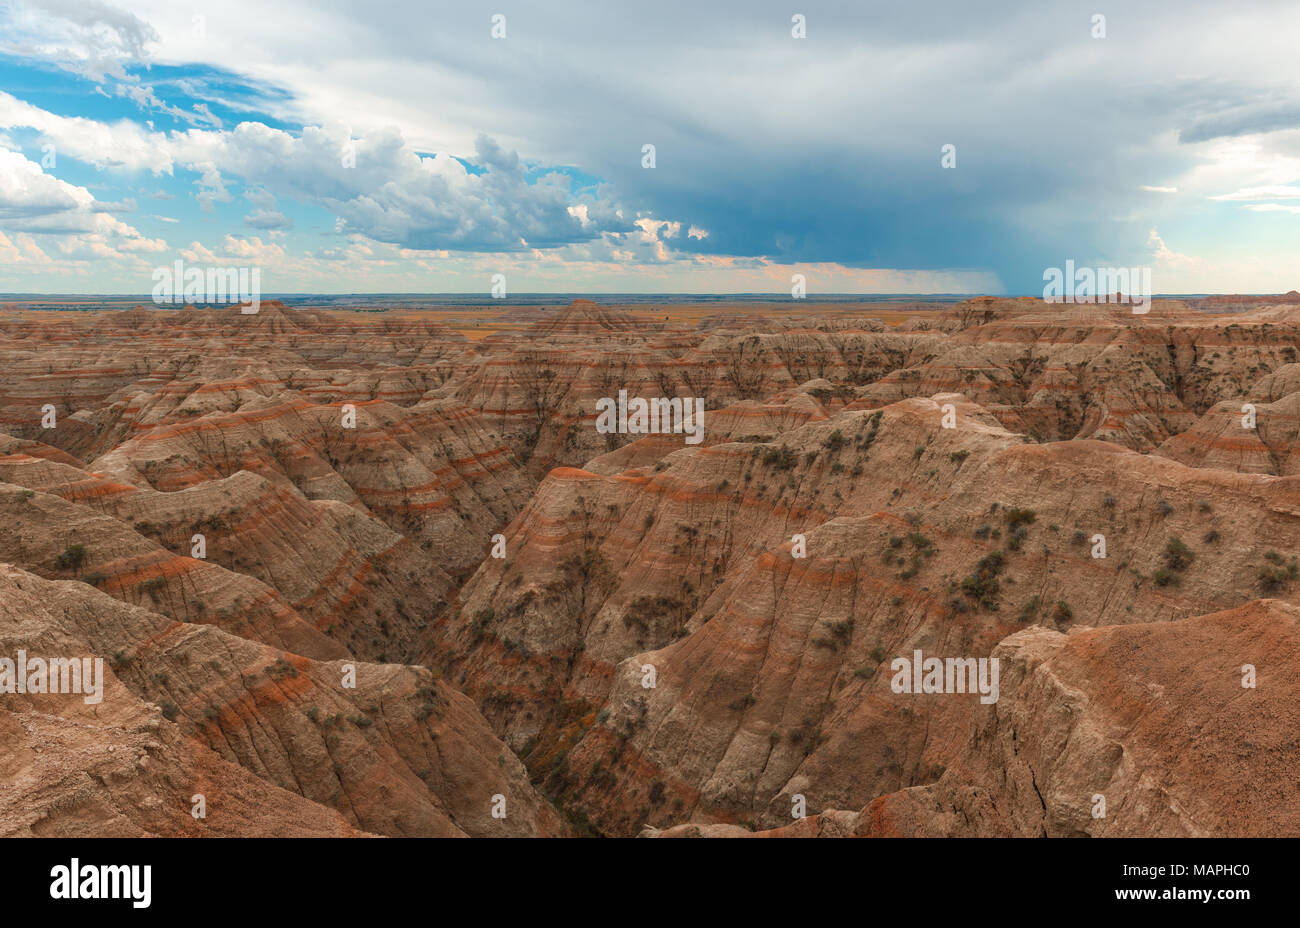 Landscape over Badlands National Park and its majestic rock strata and stone formations in South Dakota near Rapid City, USA. Stock Photo